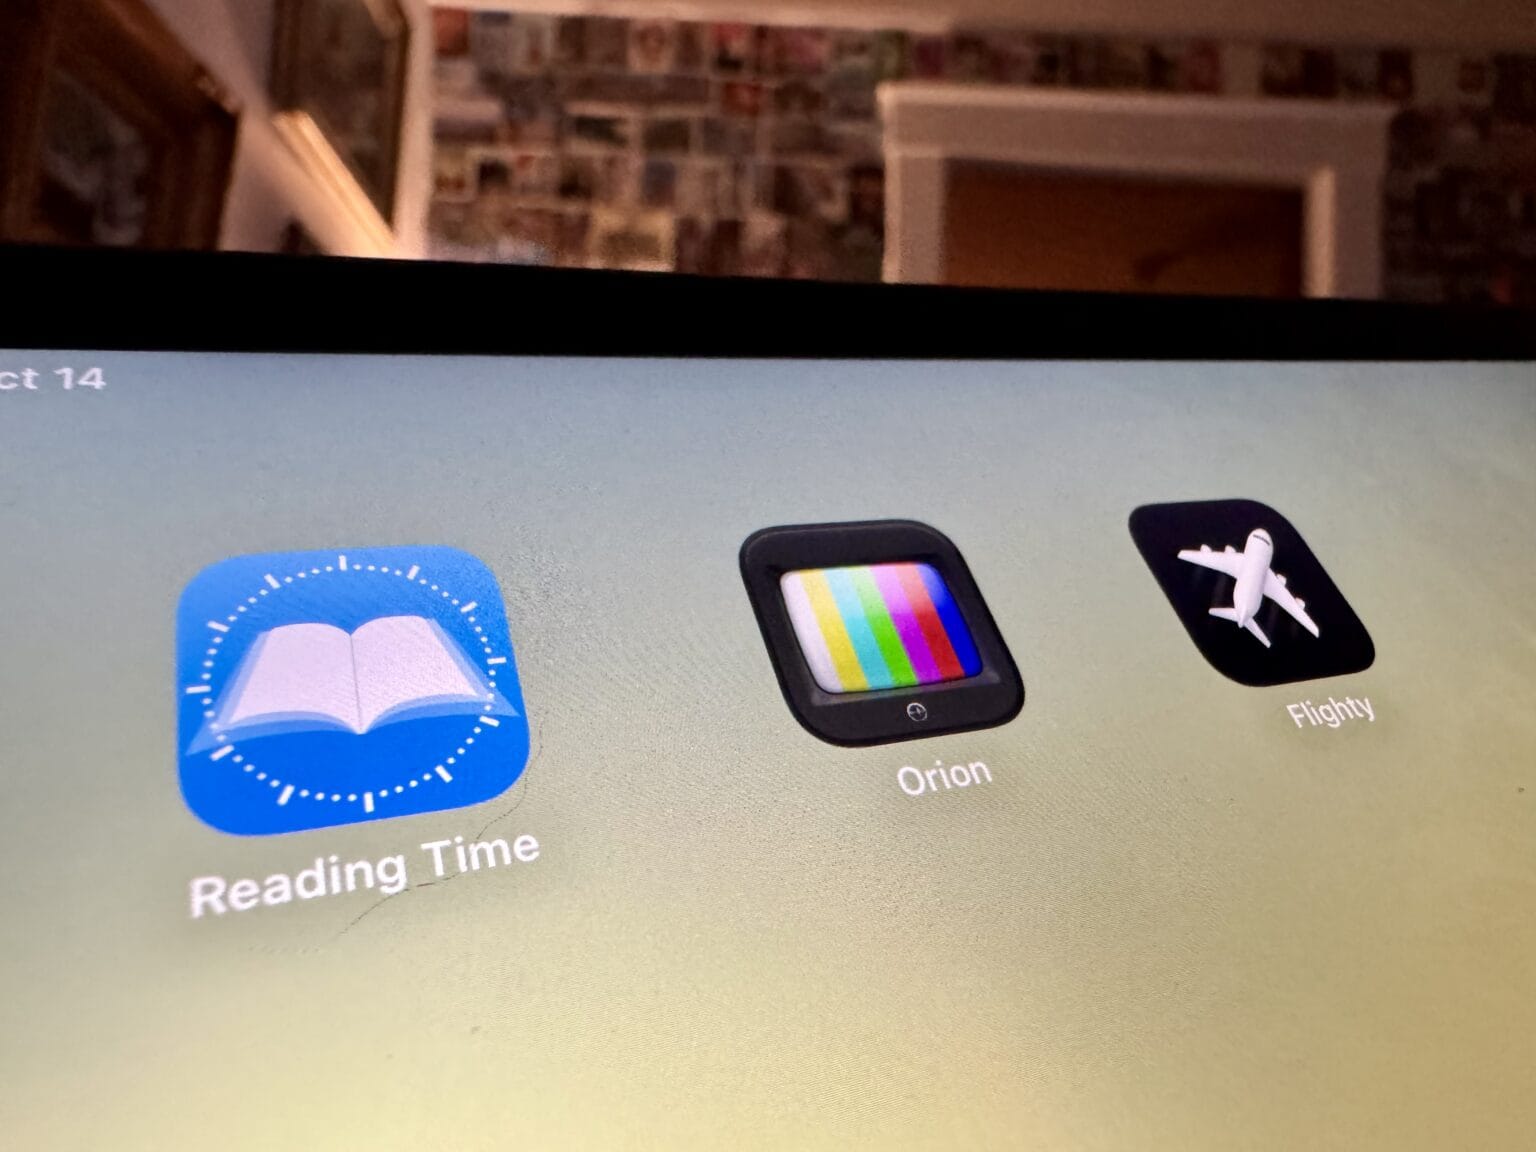 iPad screen showing three apps: Flighty, Reading Time and Orion.